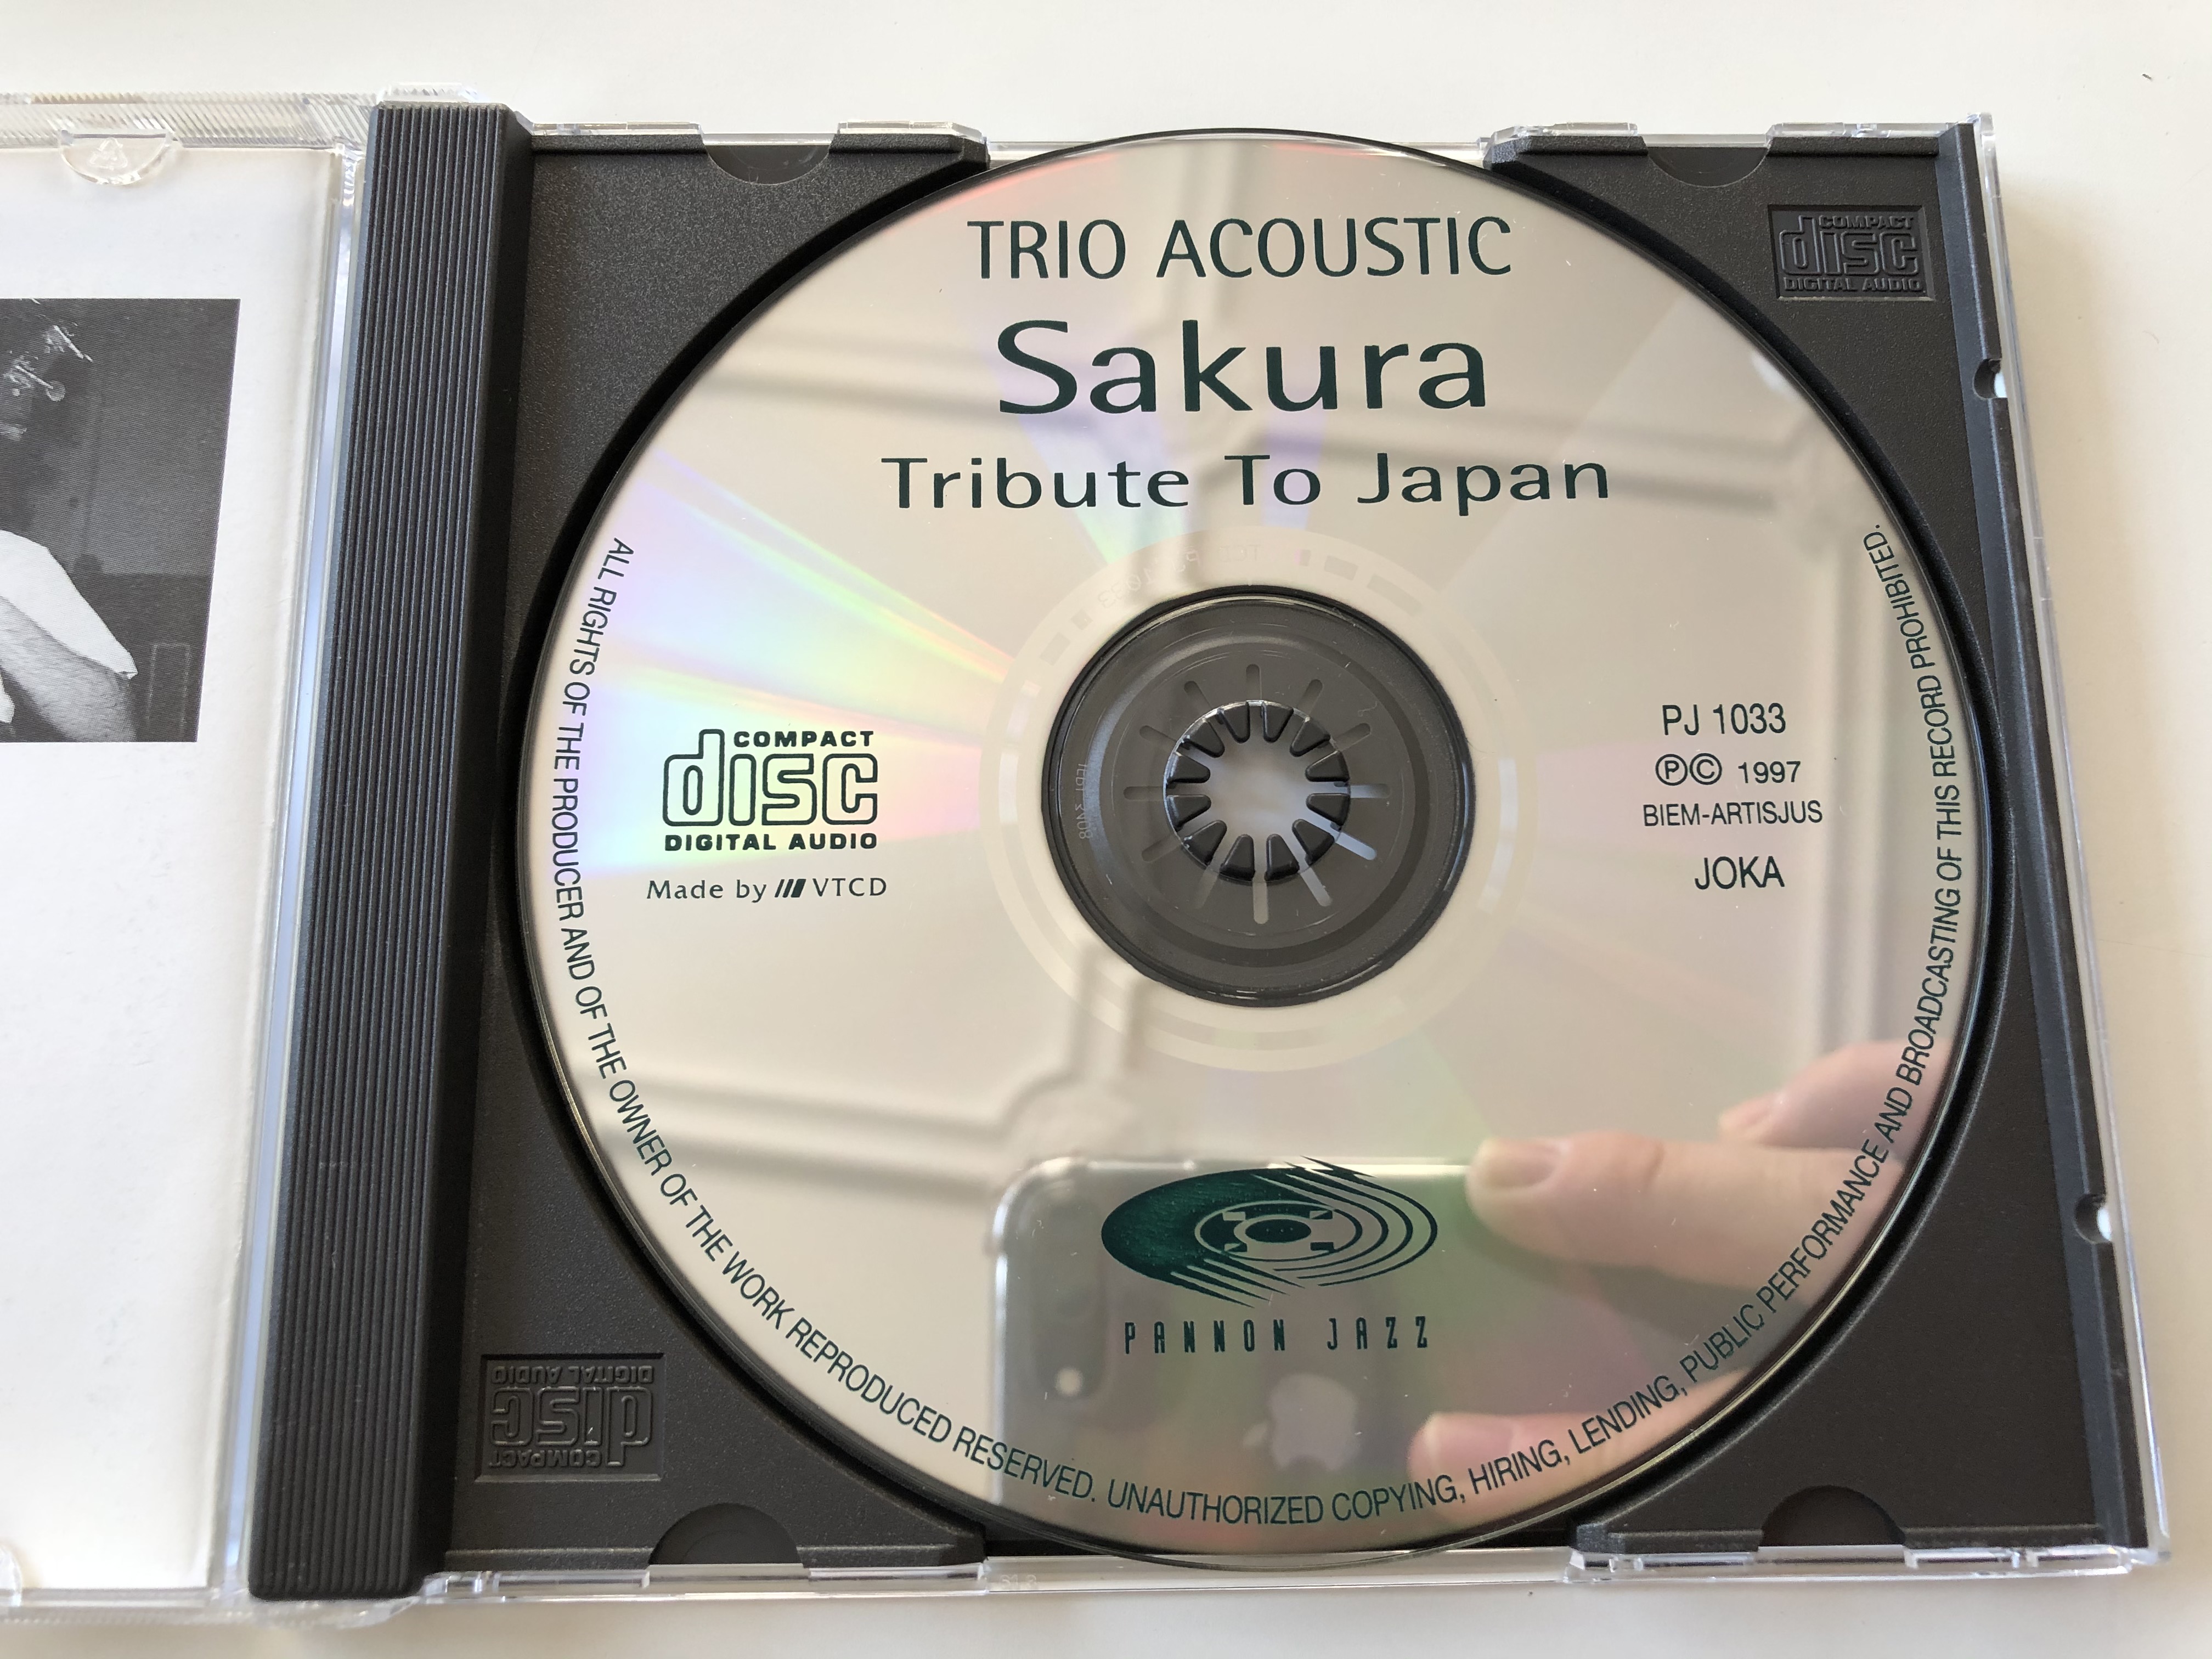 foundation-for-jazz-education-and-research-in-hungary-presents-trio-acoustic-sakura-tribute-to-japan-pannon-jazz-audio-cd-1997-pj-1033-5-.jpg